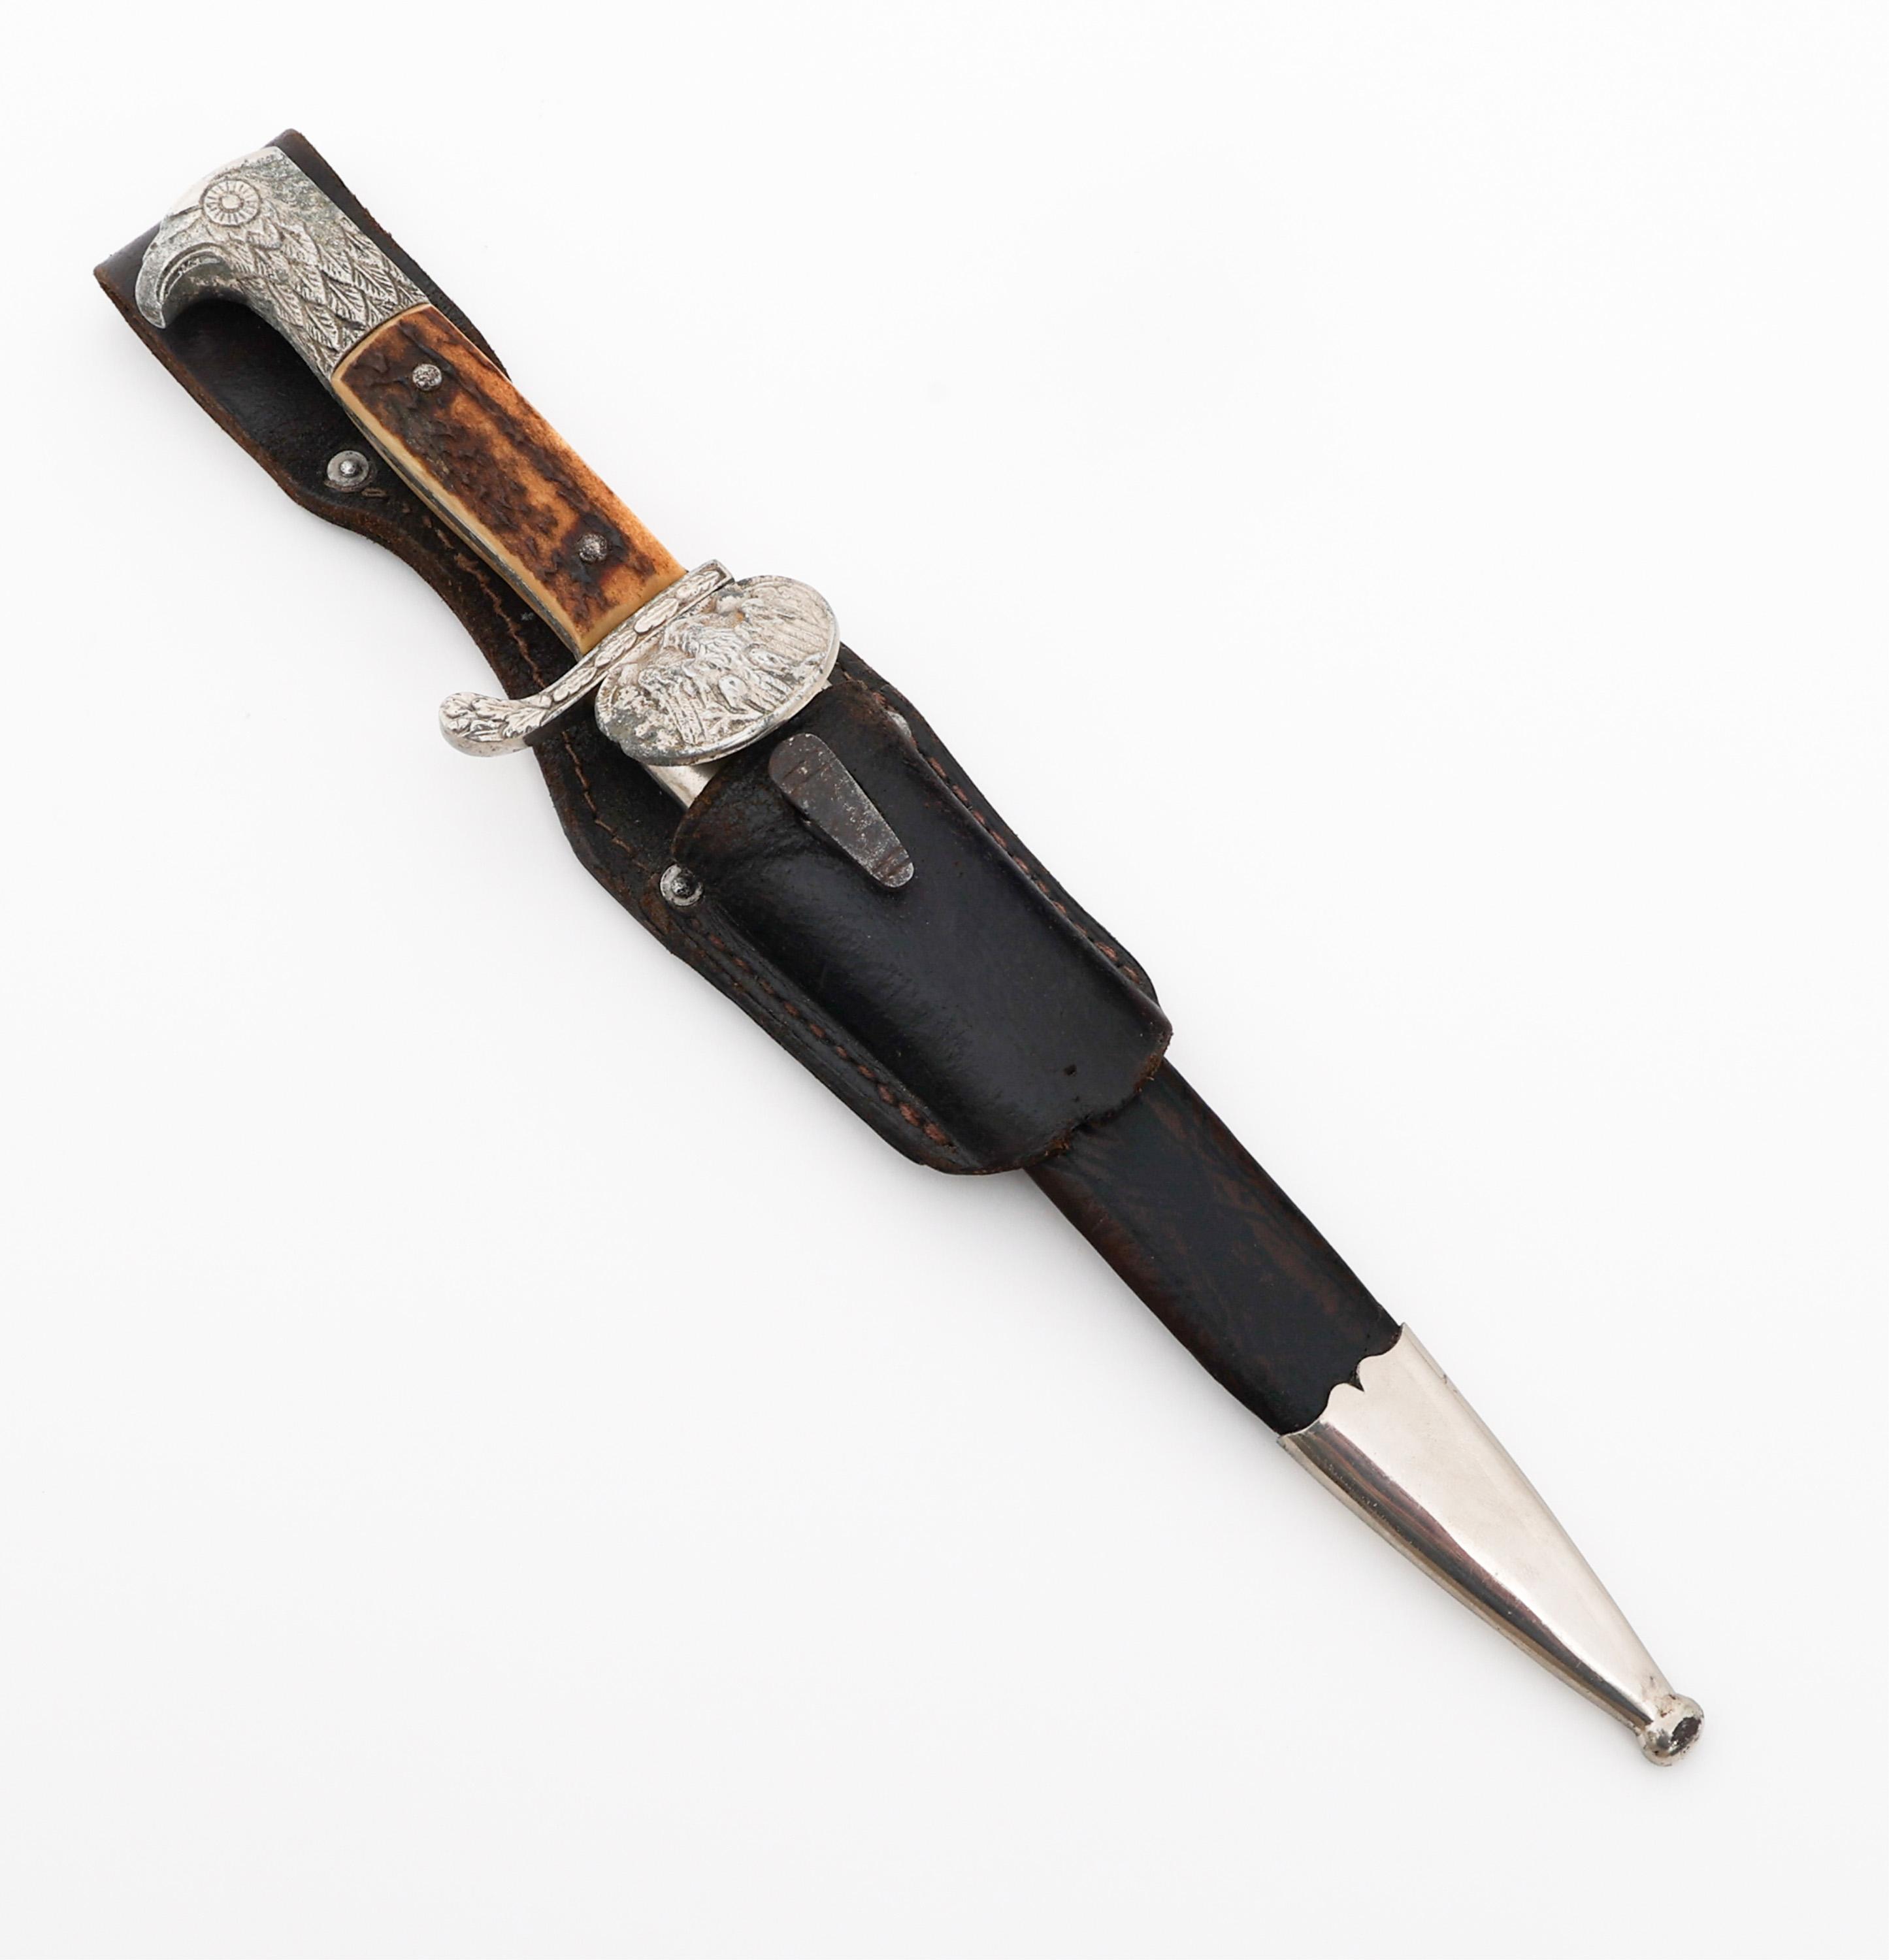 WEIMAR REPUBLIC POLICE CLAMSHELL BAYONET by CLEMEN